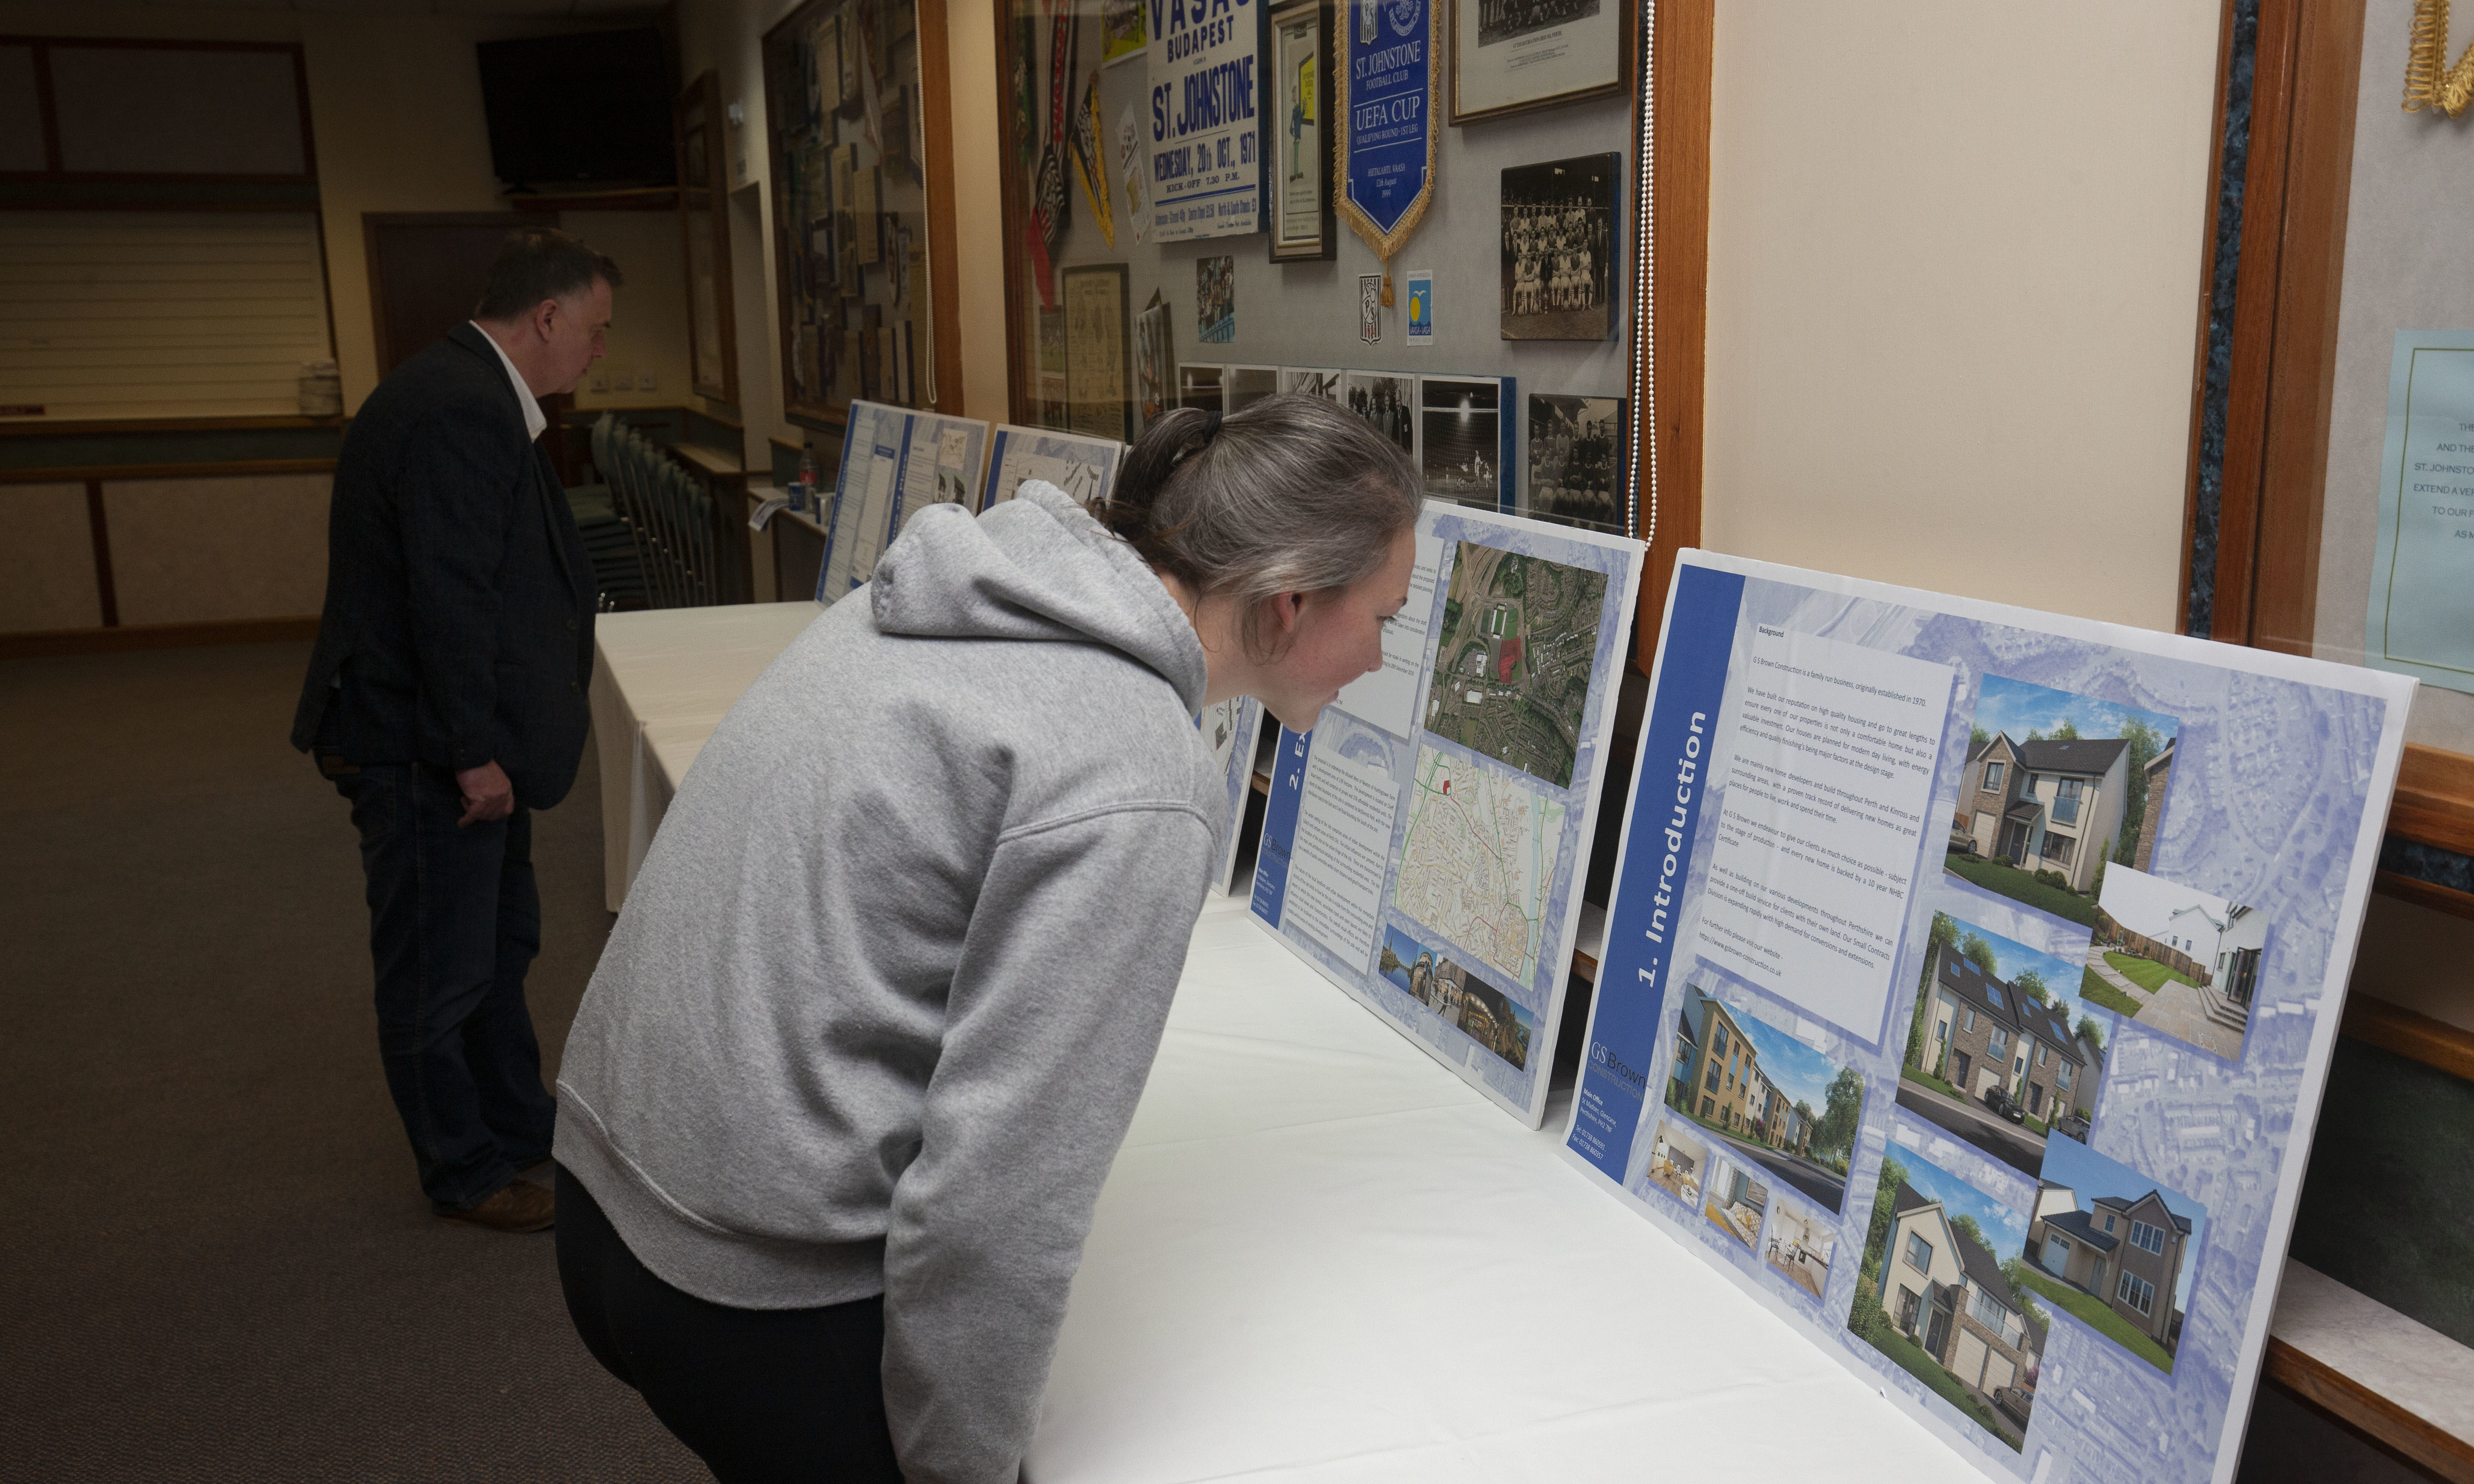 A public consultation was held to provide information about the potential new housing development at McDiarmid Park last week.